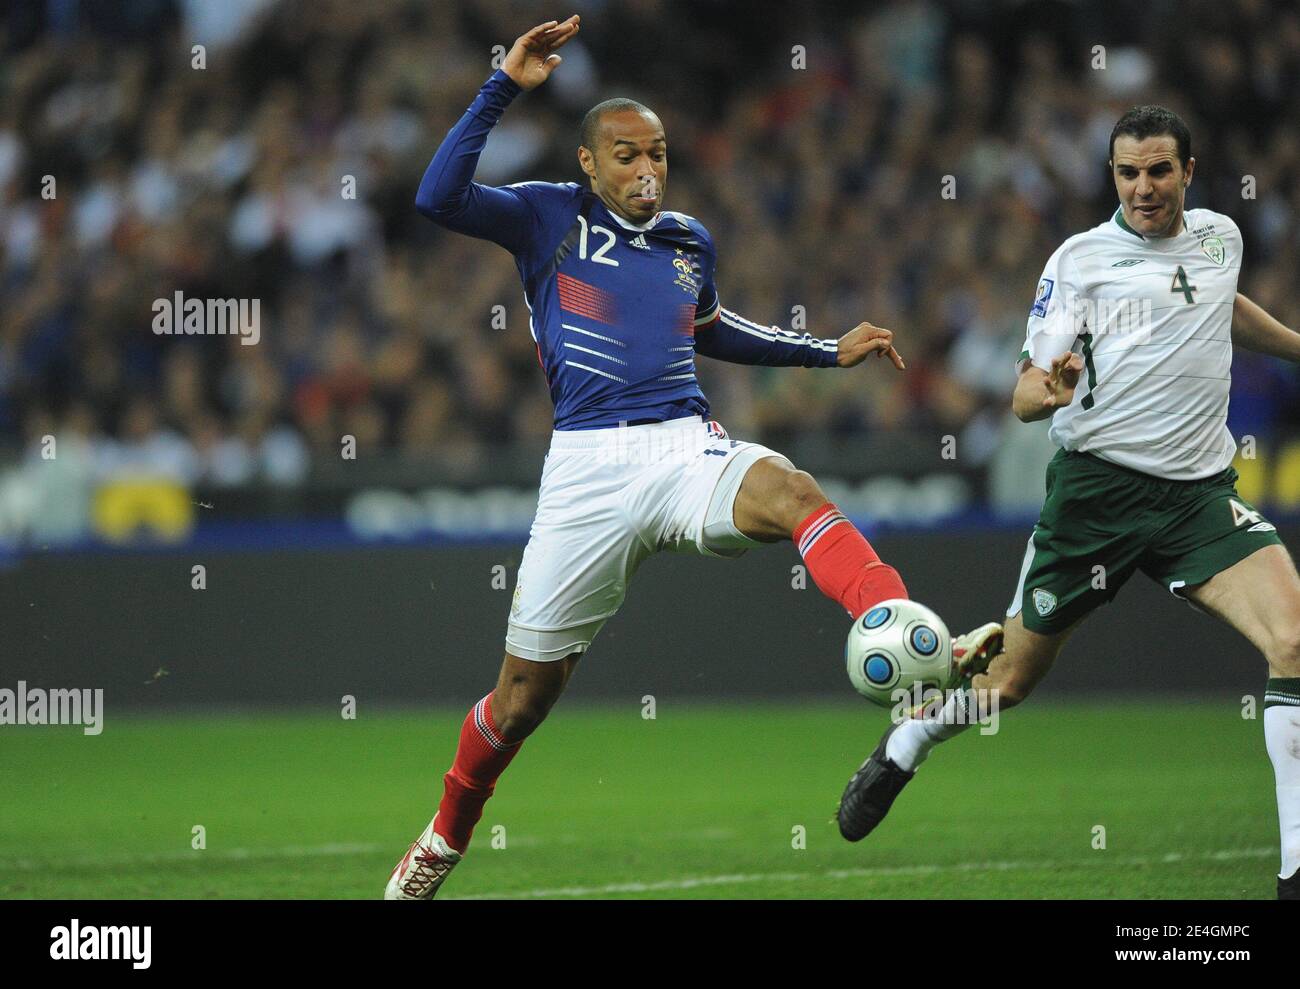 France's Thierry Henry during World Cup Play-off soccer match, France vs Republic of Ireland at Stade de France in Saint-Denis near Paris, France on November 18, 2009. The Match ended in a 1-1 draw. Photo by Christian Liewig/ABACAPRESS.COM Stock Photo